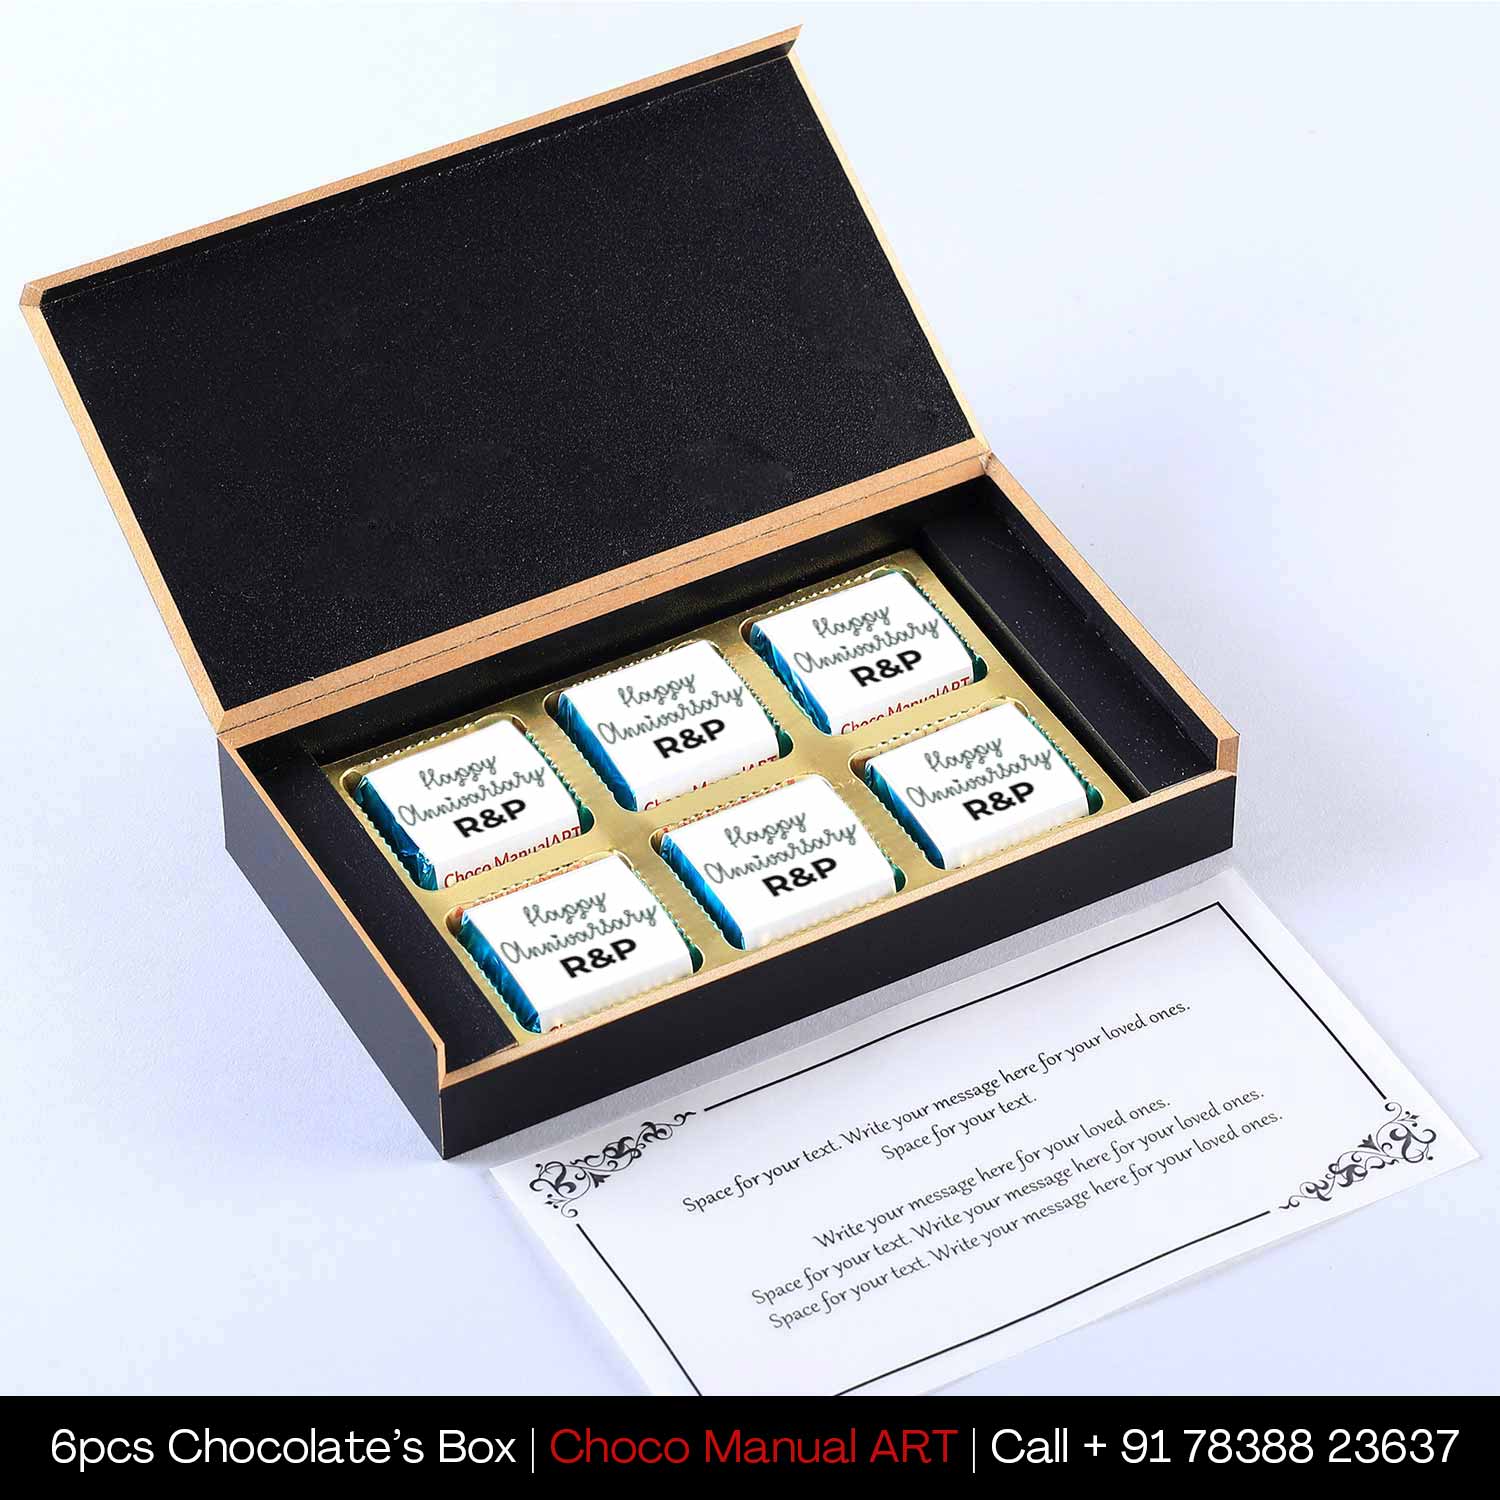 Buy Personalised gifts I Order online for Customised chocolate gift box For Your Wedding Anniversary